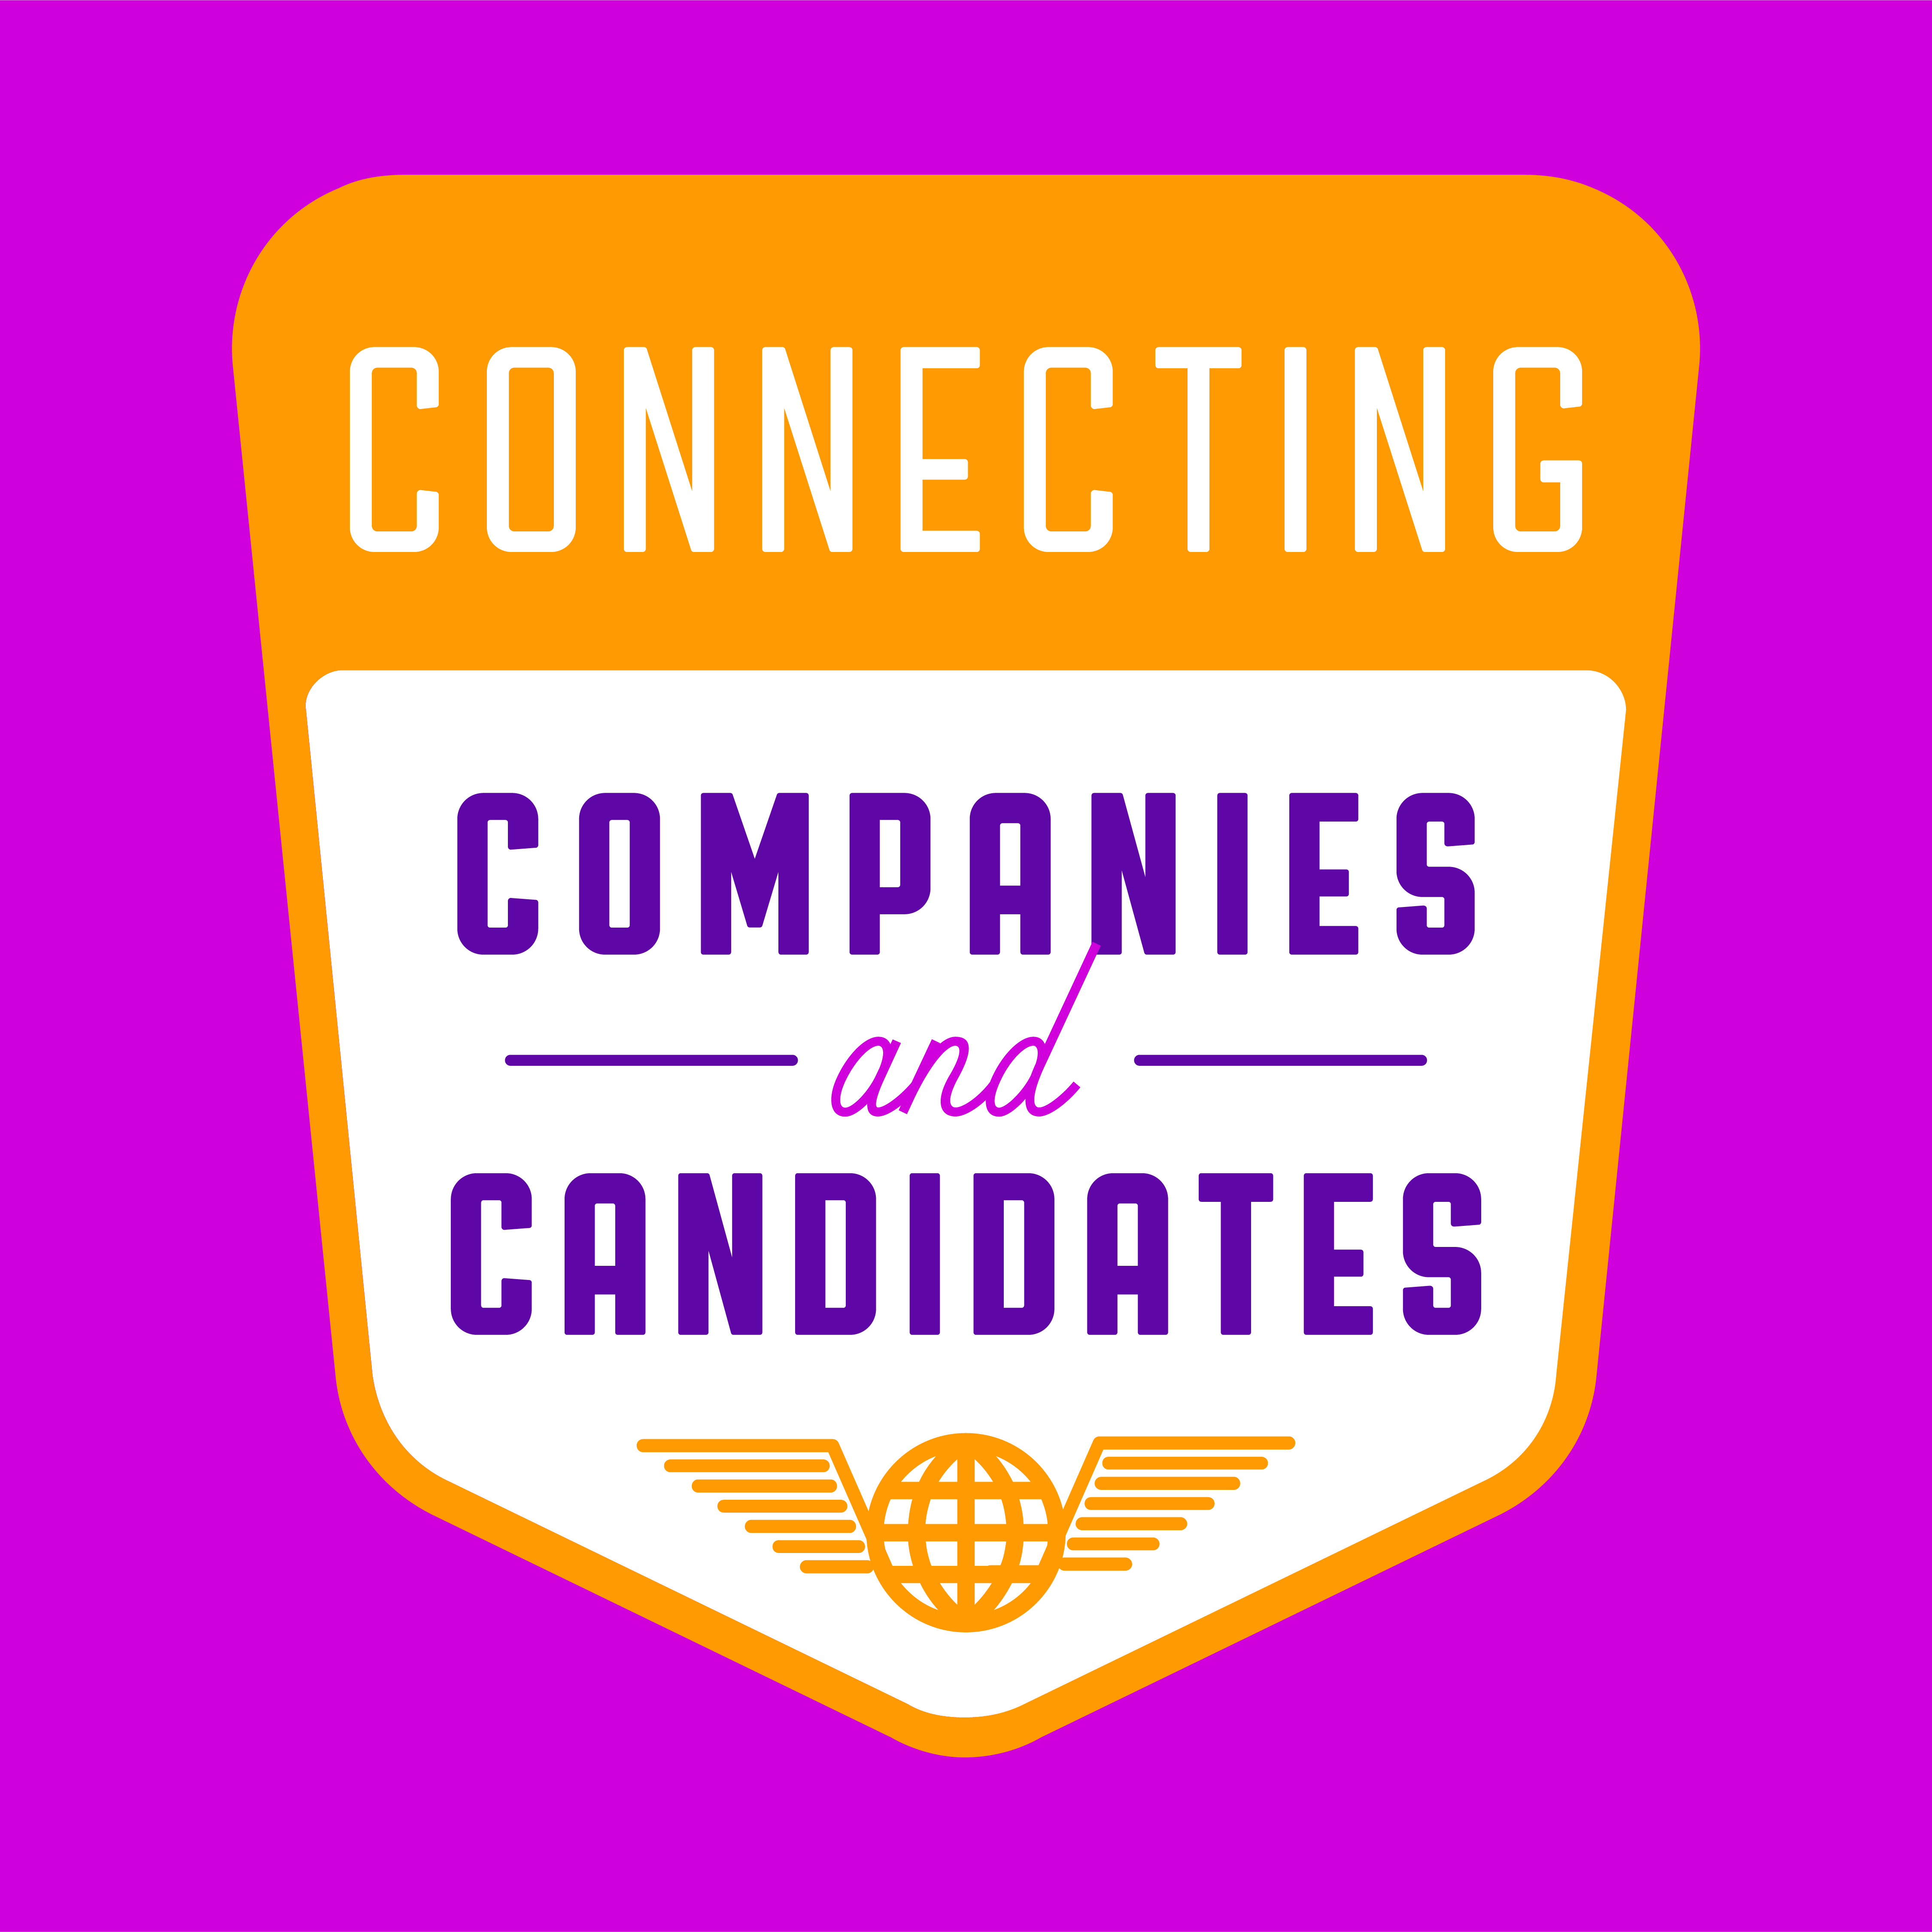 Click Connect Companies and Candidate's for mentee application